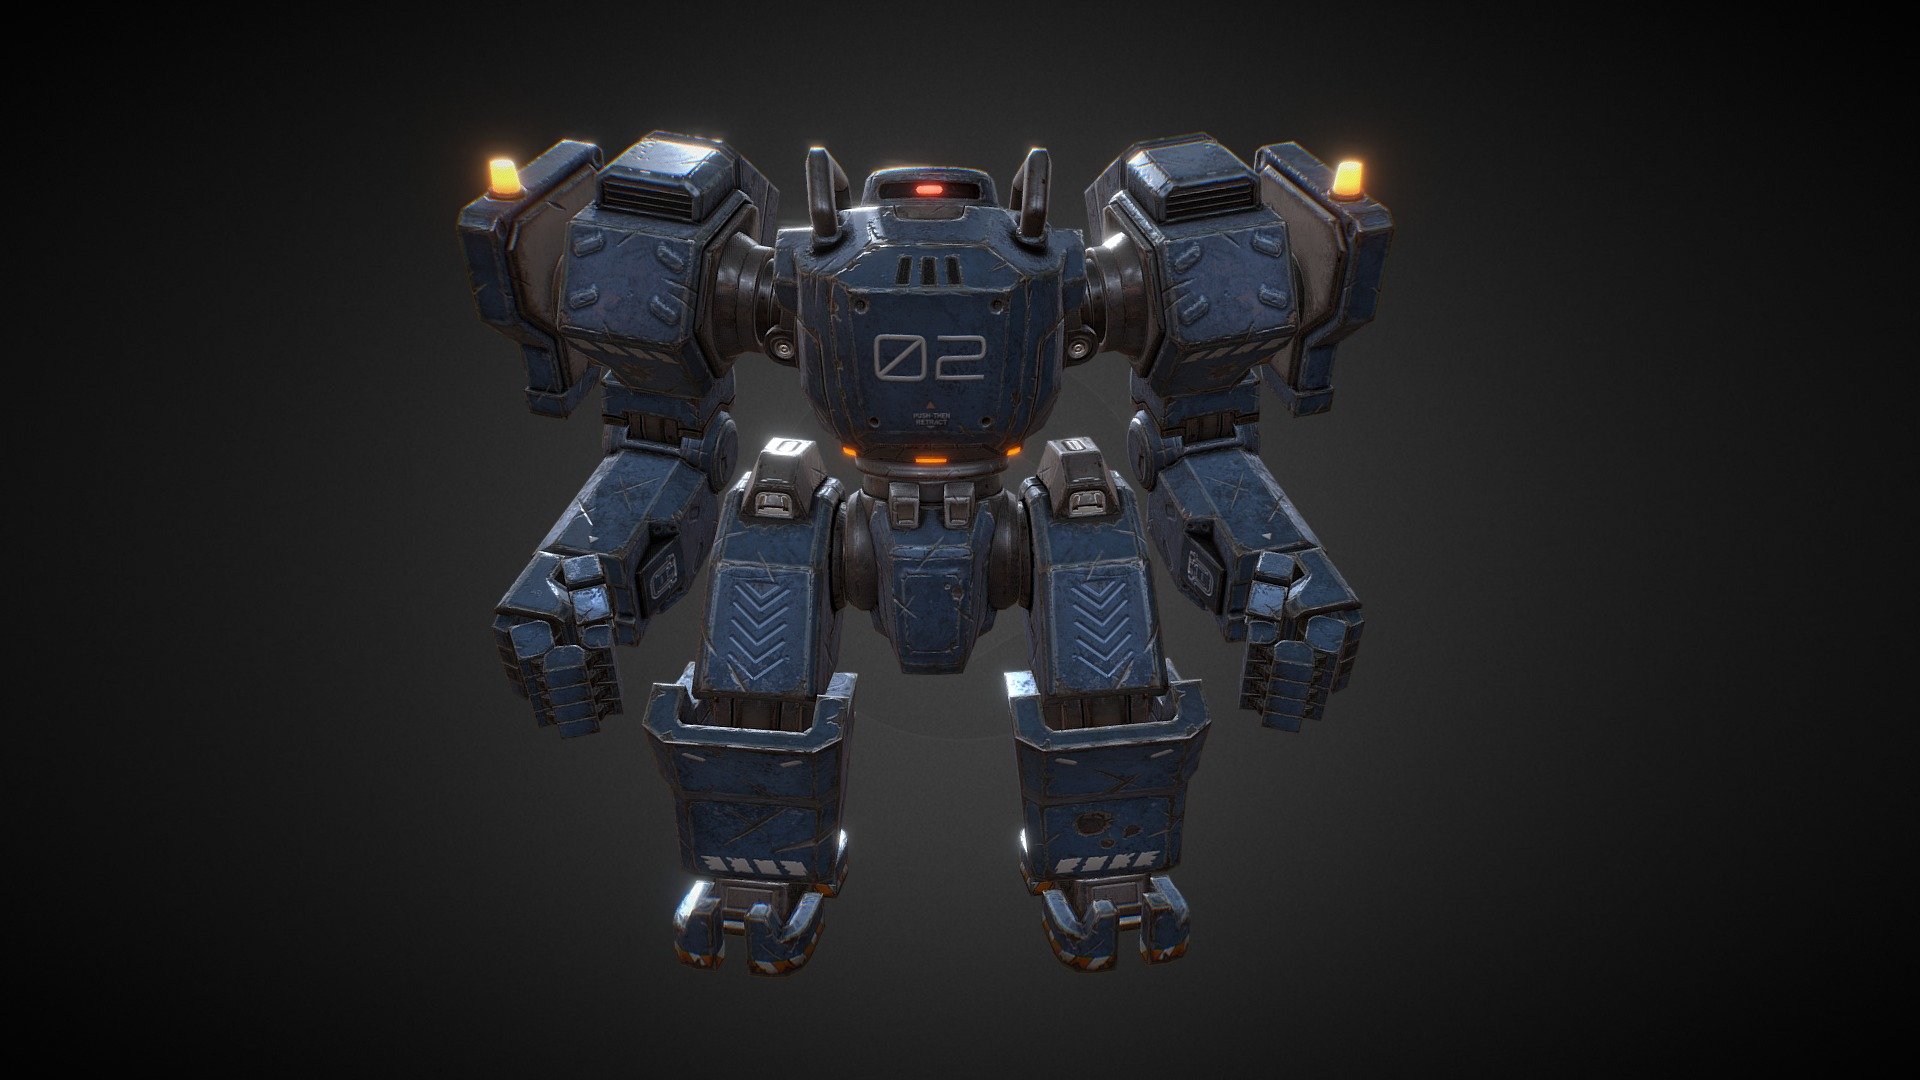 This helpful robot does all the heavy lifting around the USFF Hangar Bay, designed specifically for the purpose of keeping the staff safe from harm.

https://archangelgame.com/ - Safety Bot - 3D model by Archangel: Hellfire (@archangelgame) 3d model